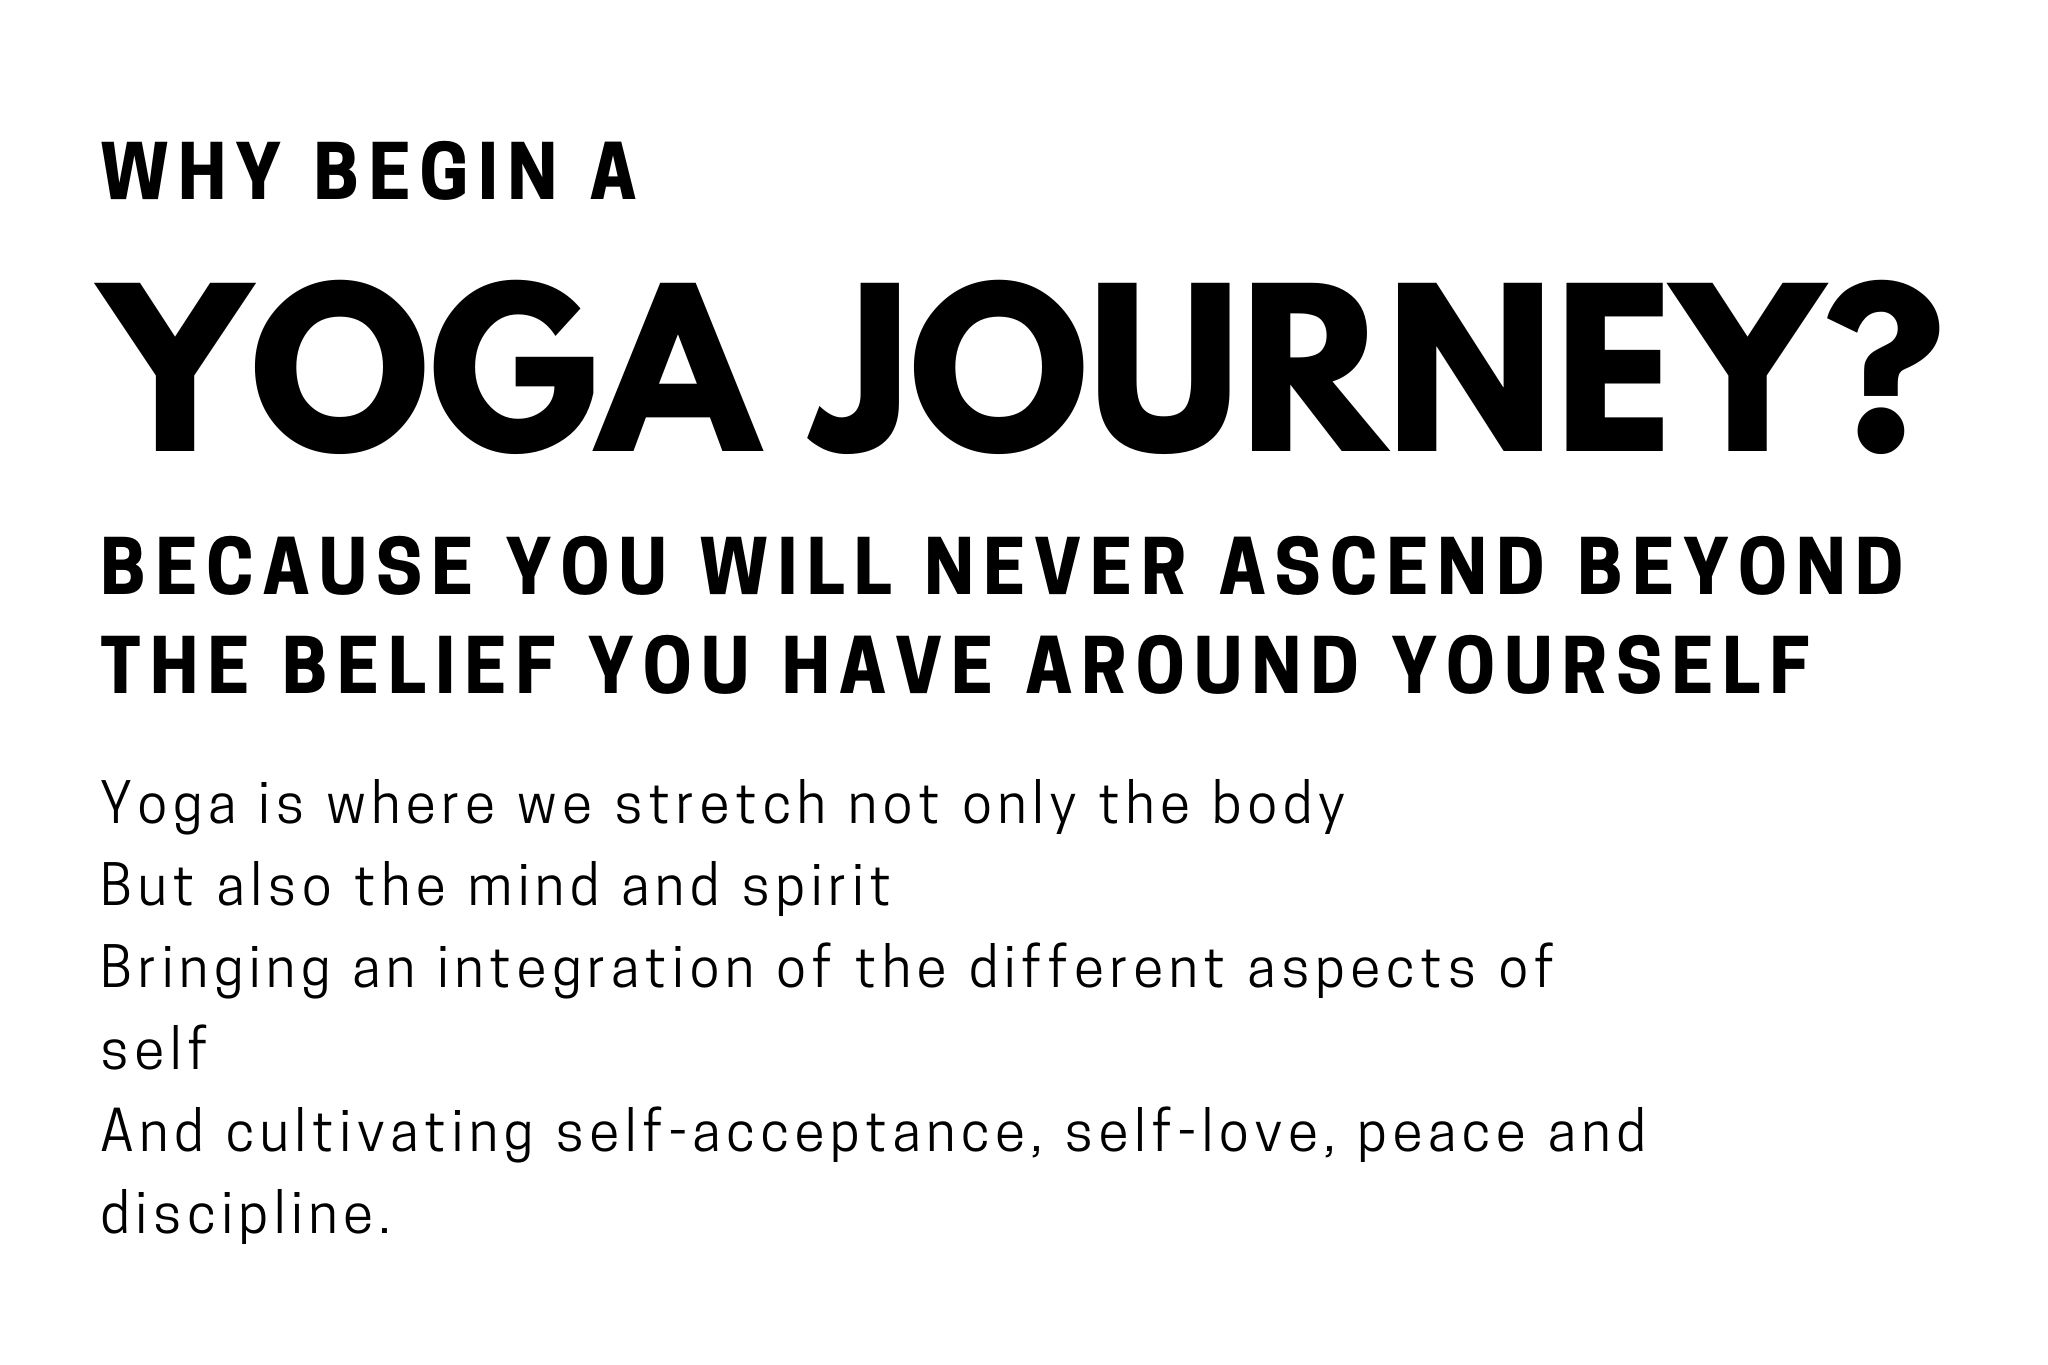 Why Begin a Yoga Journey? Because you will never ascend beyoned the belief you have around yourself. Yoga is where we streth not only the body but also the mind and spirit bringing an integration of the different aspects of self and cultivating self acceptance, self-love, eace and self-discipline. Carla LunAscention